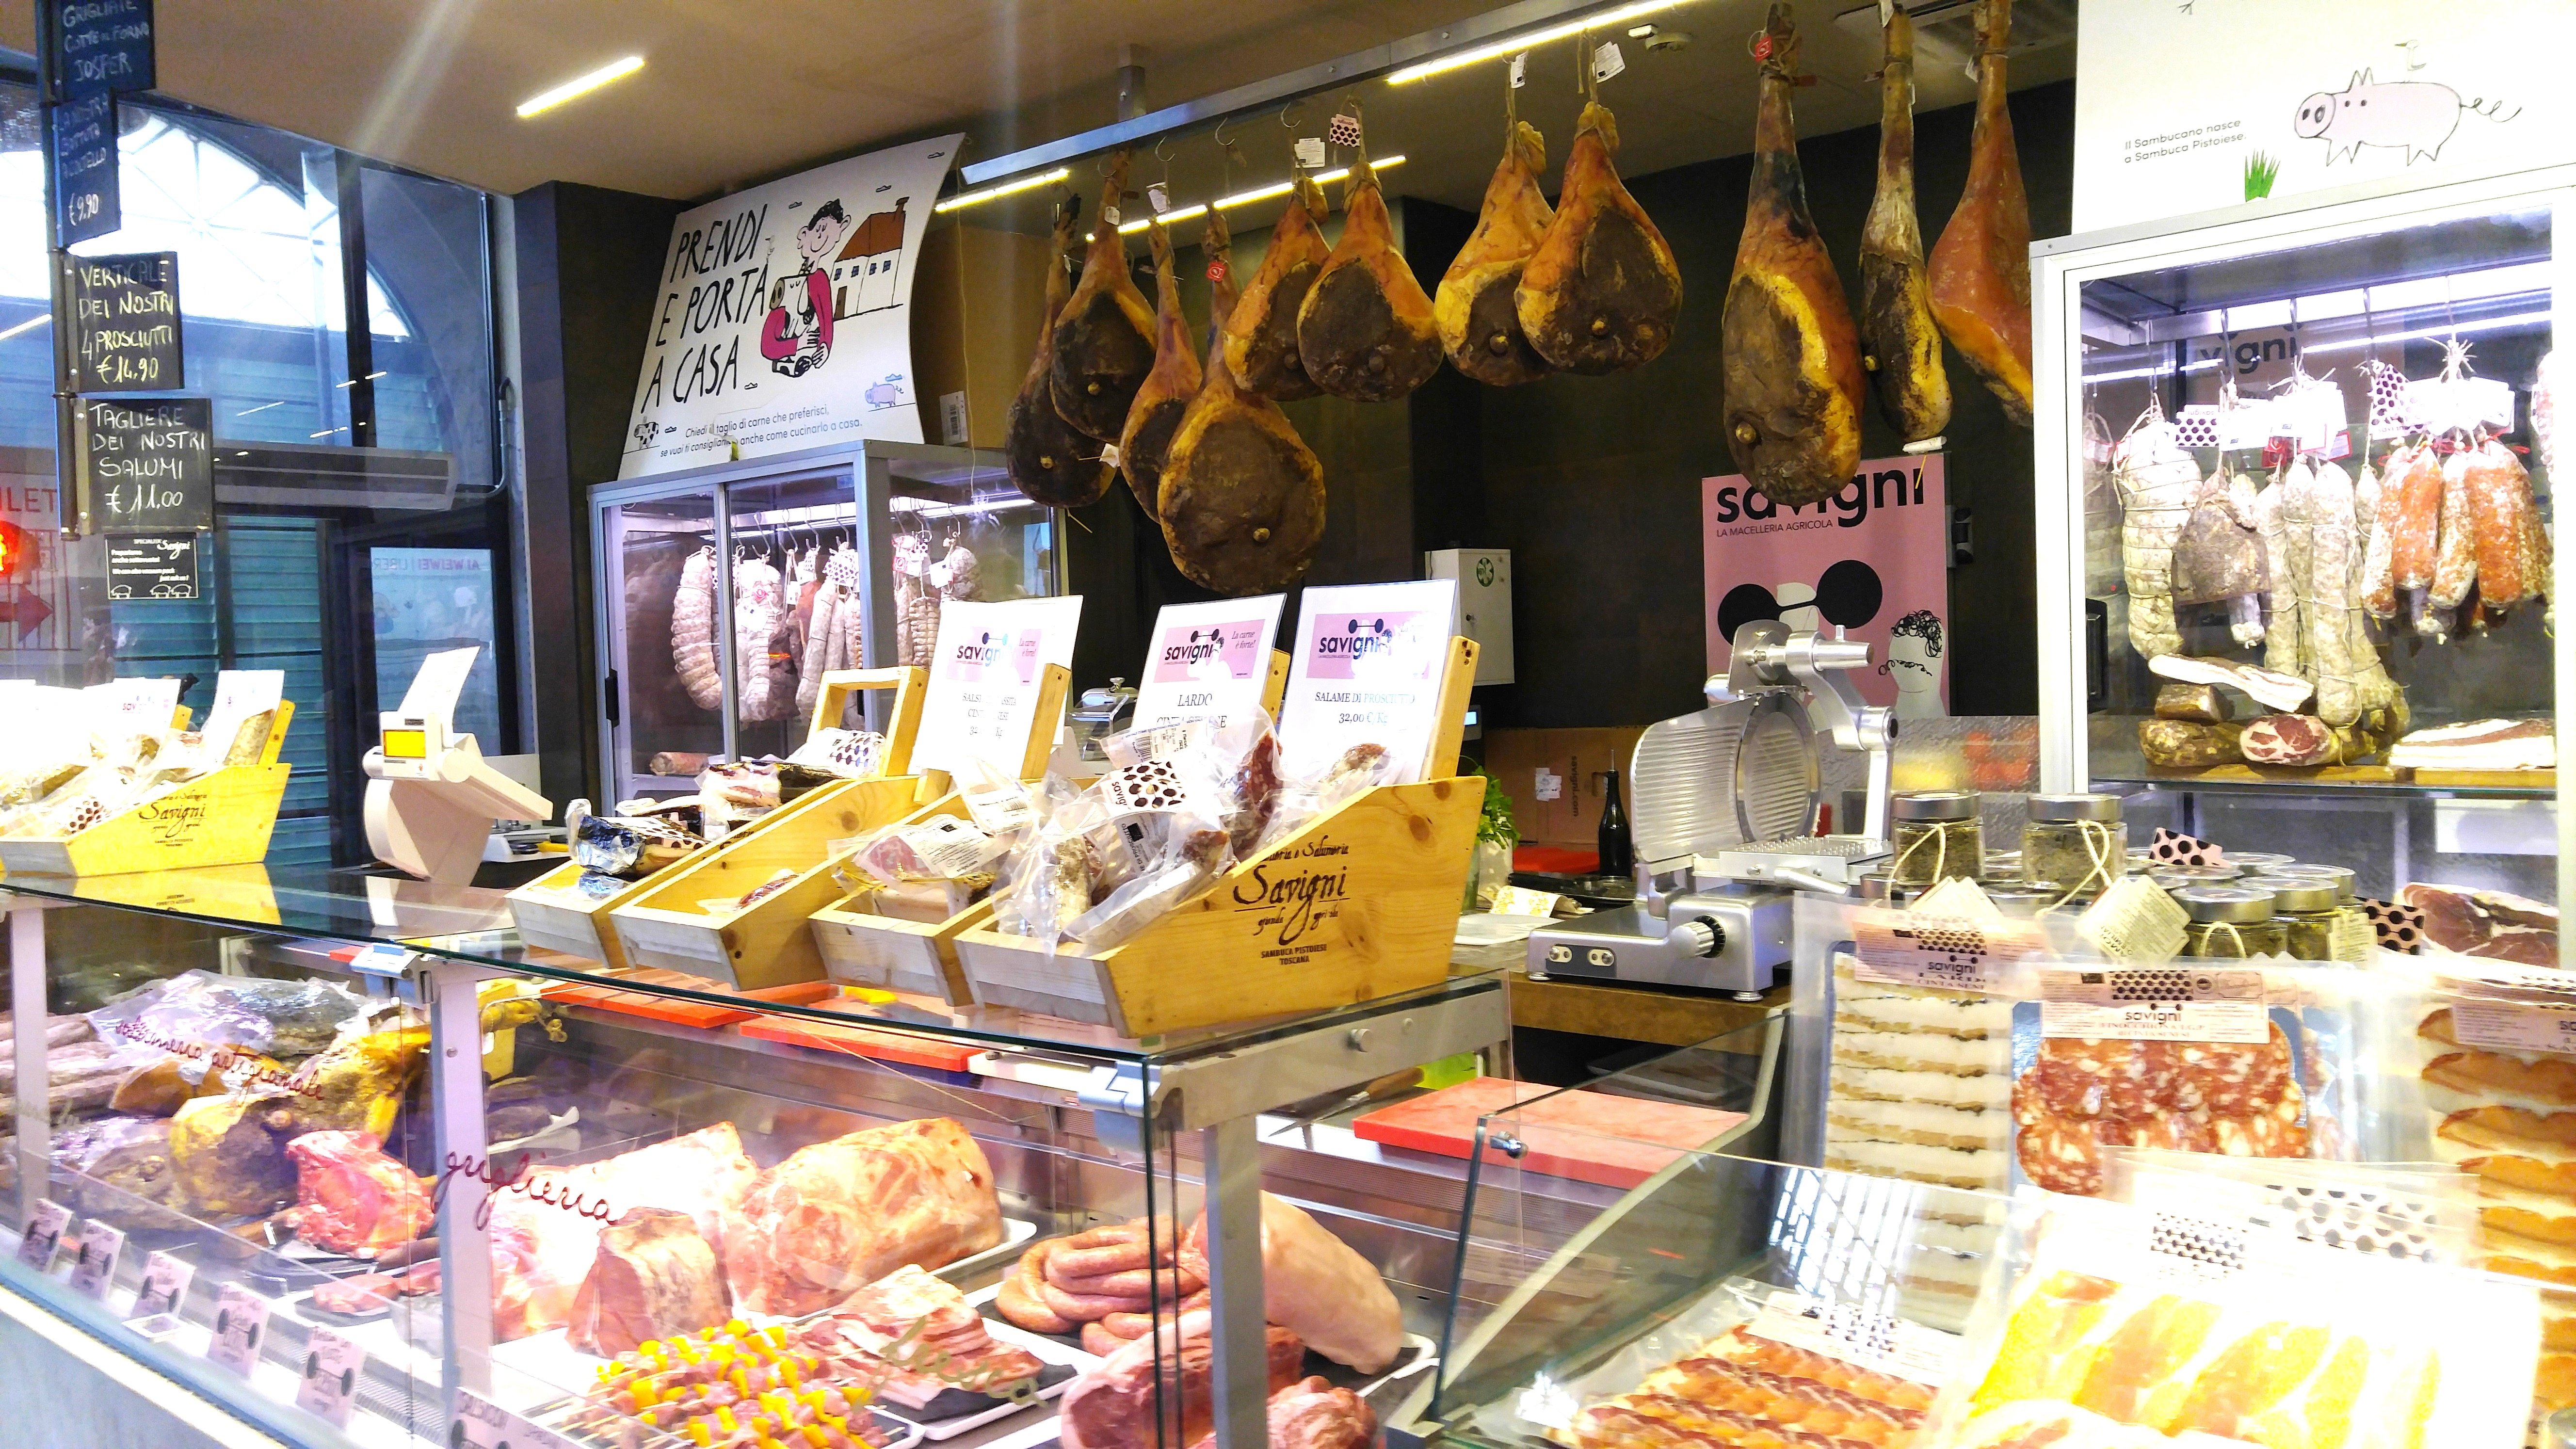 Meats on display at Mercato Centrale Firenze